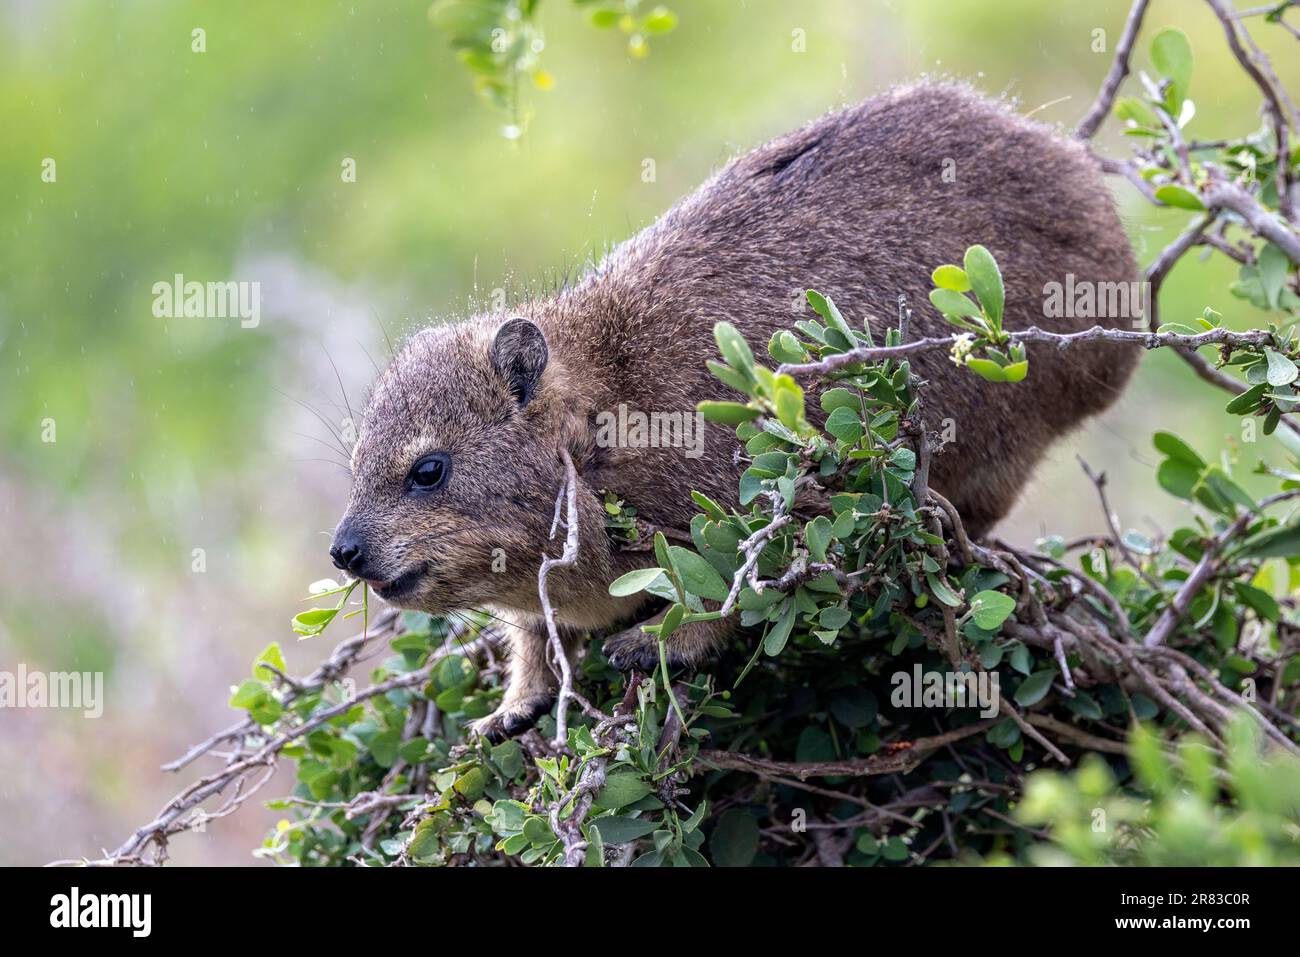 Rock hyrax (Procavia capensis) at Boulders Beach in Simon's Town, near Cape Town, South Africa Stock Photo